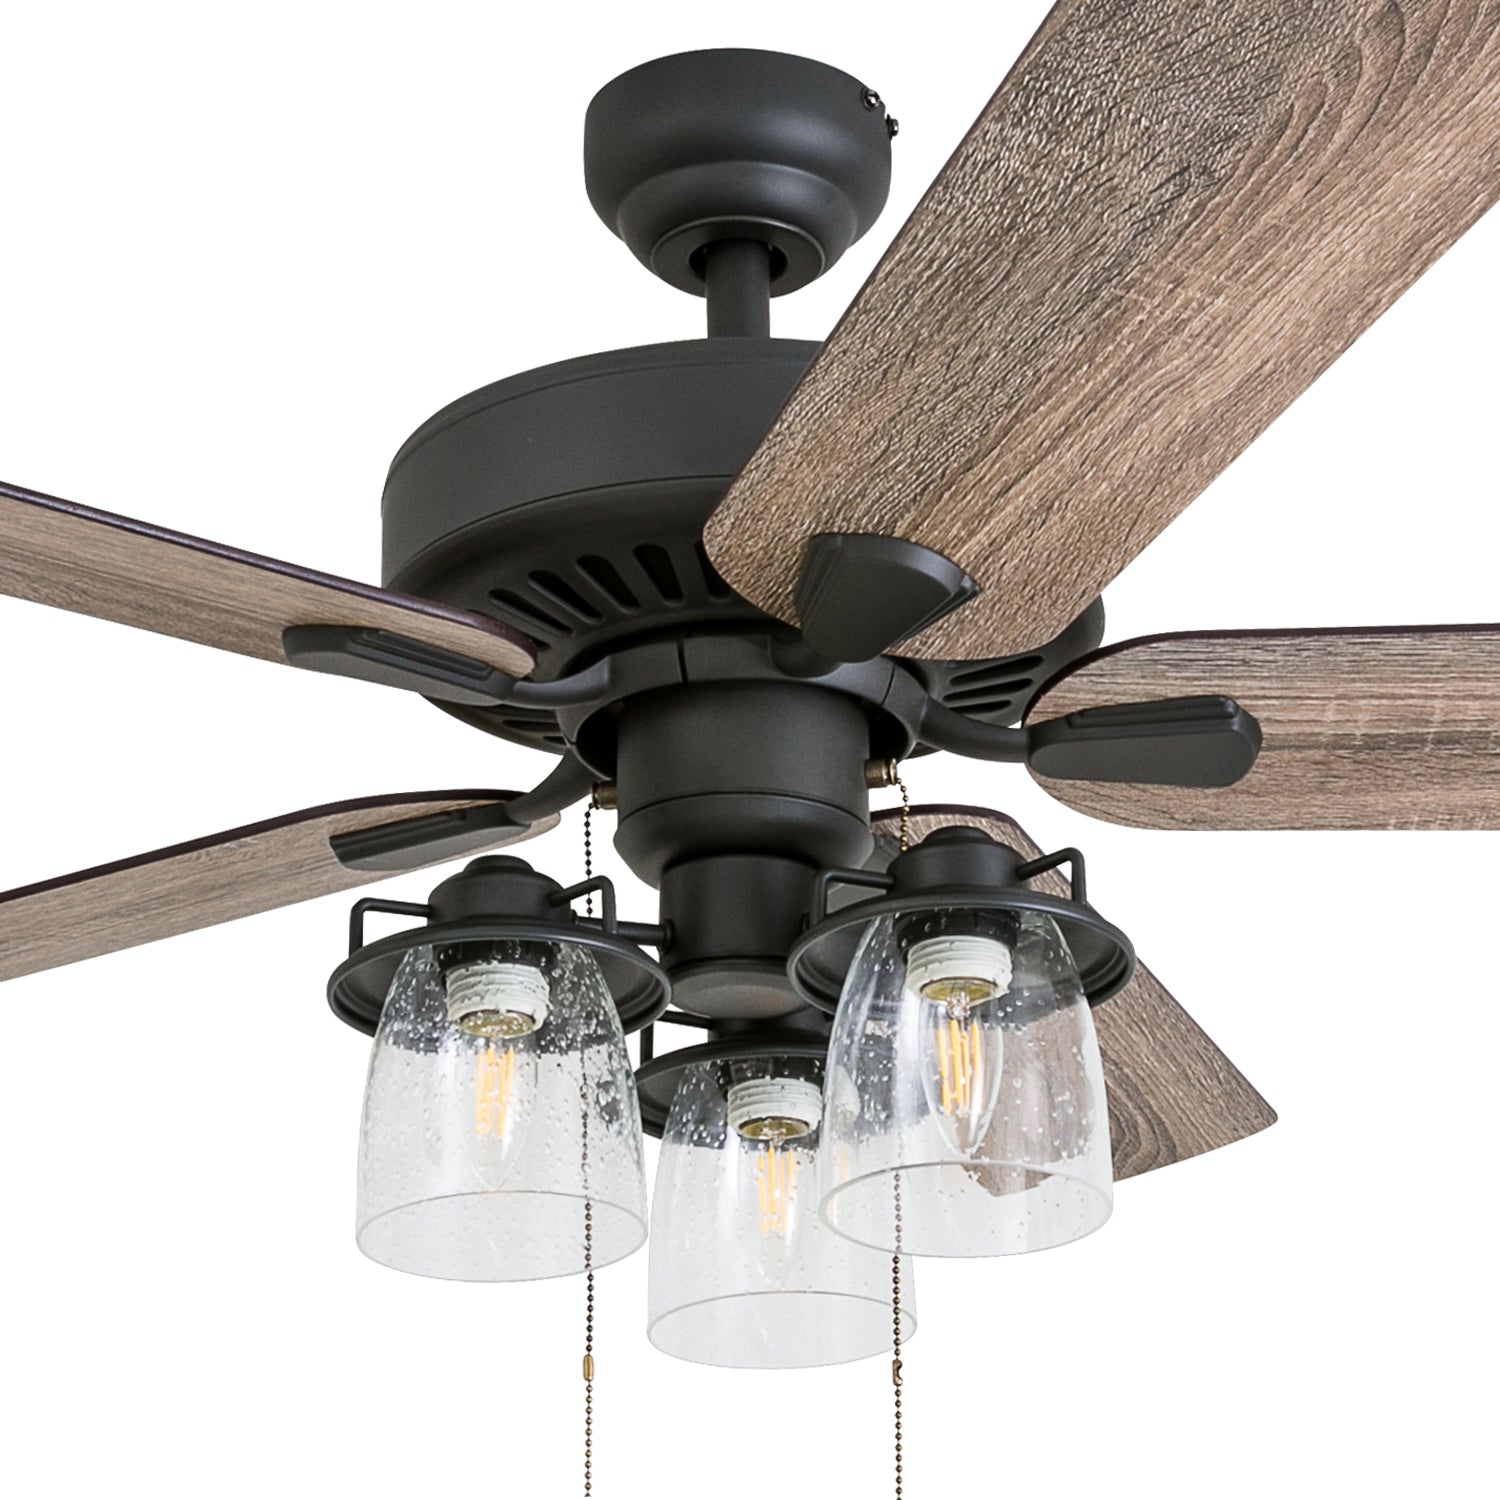 52 Inch Briarcrest, Bronze, Pull Chain, Ceiling Fan by Prominence Home